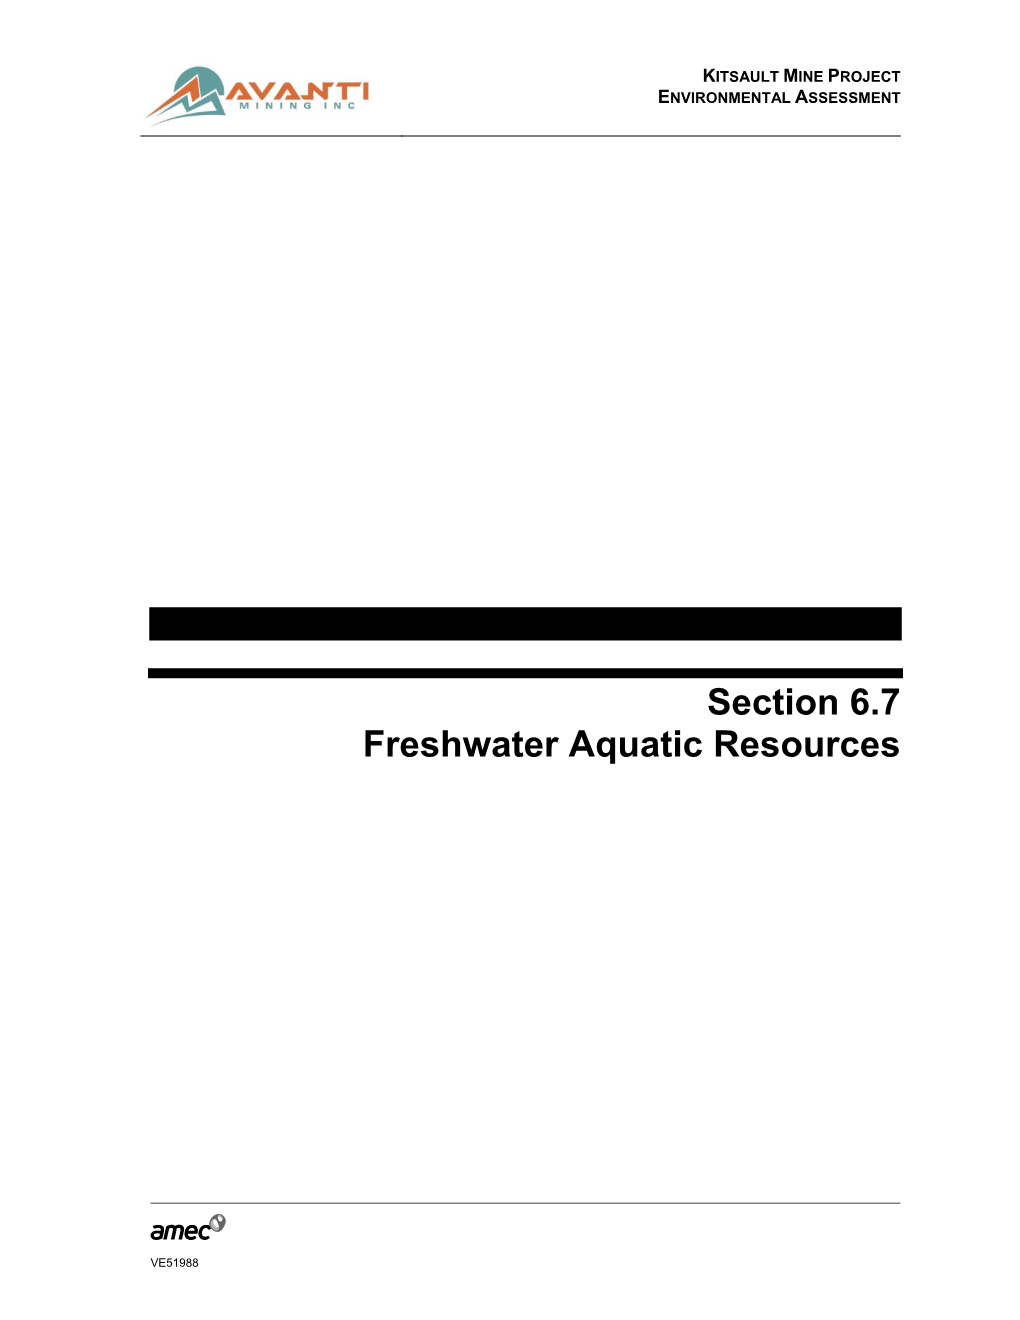 Section 6.7 Freshwater Aquatic Resources